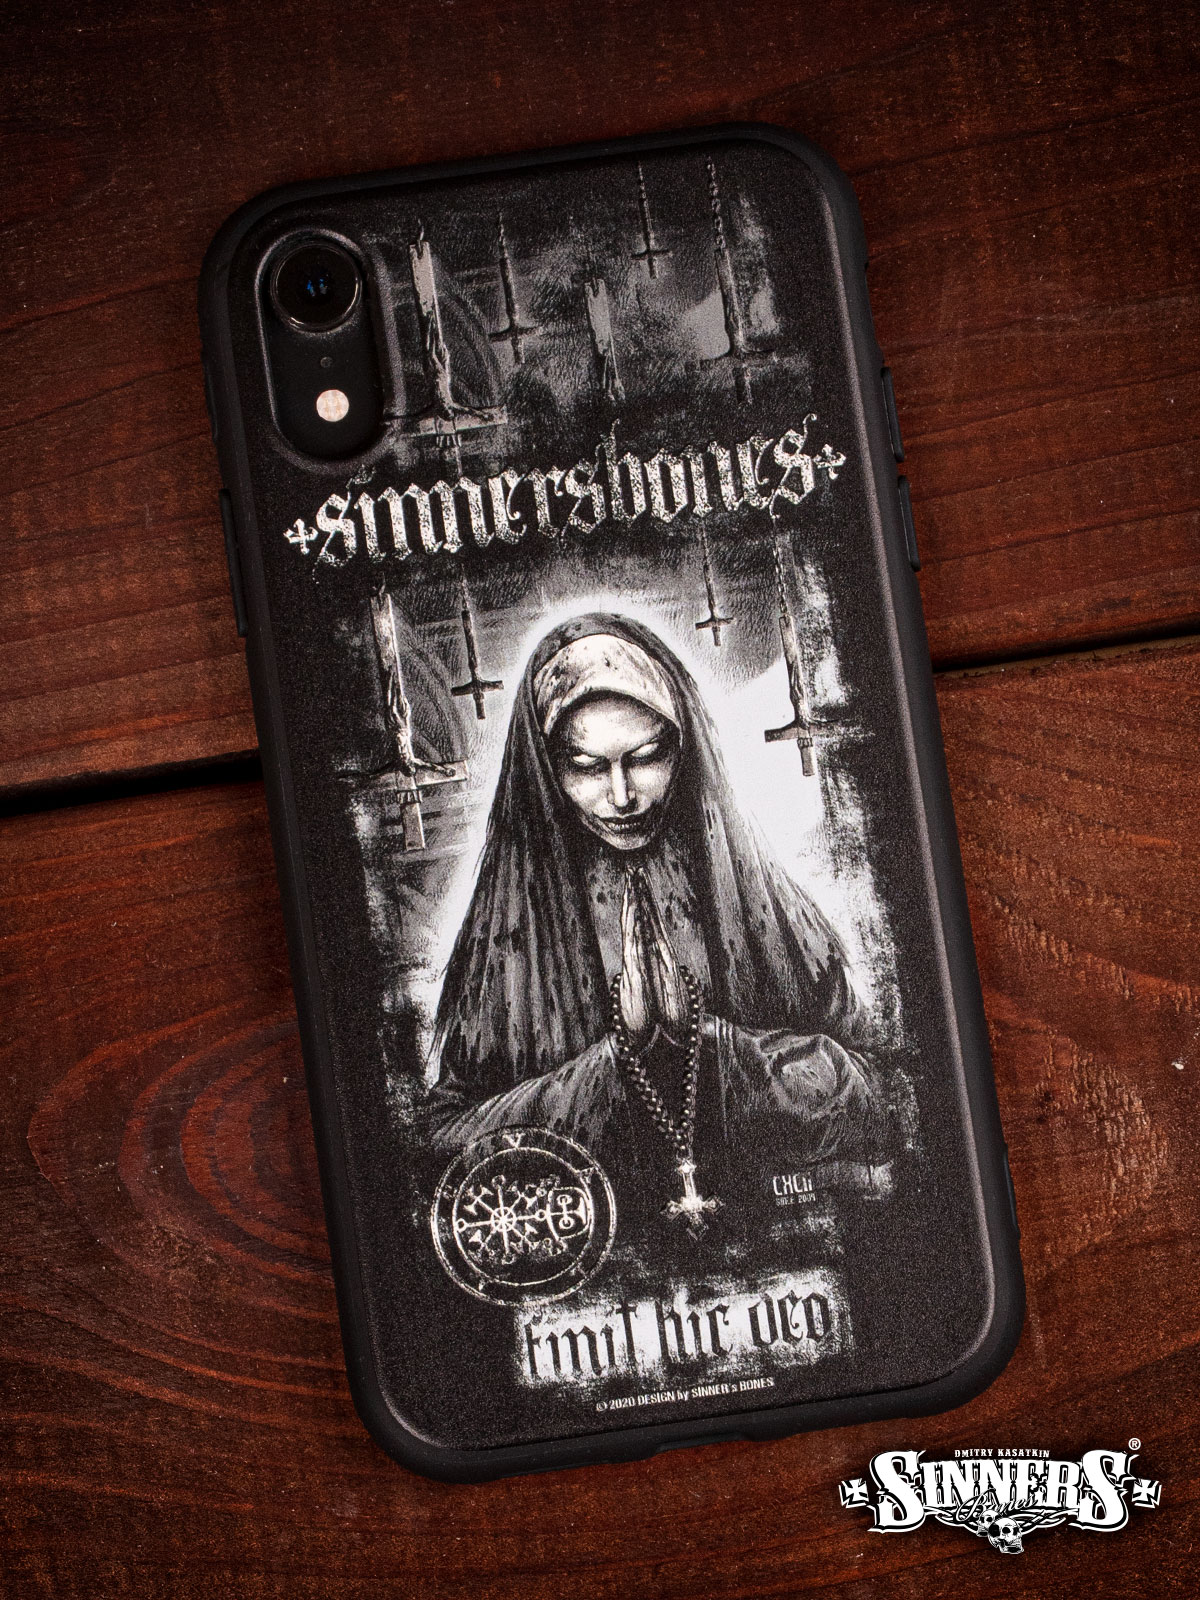 Case for iPhone "Finit hic, Deo"